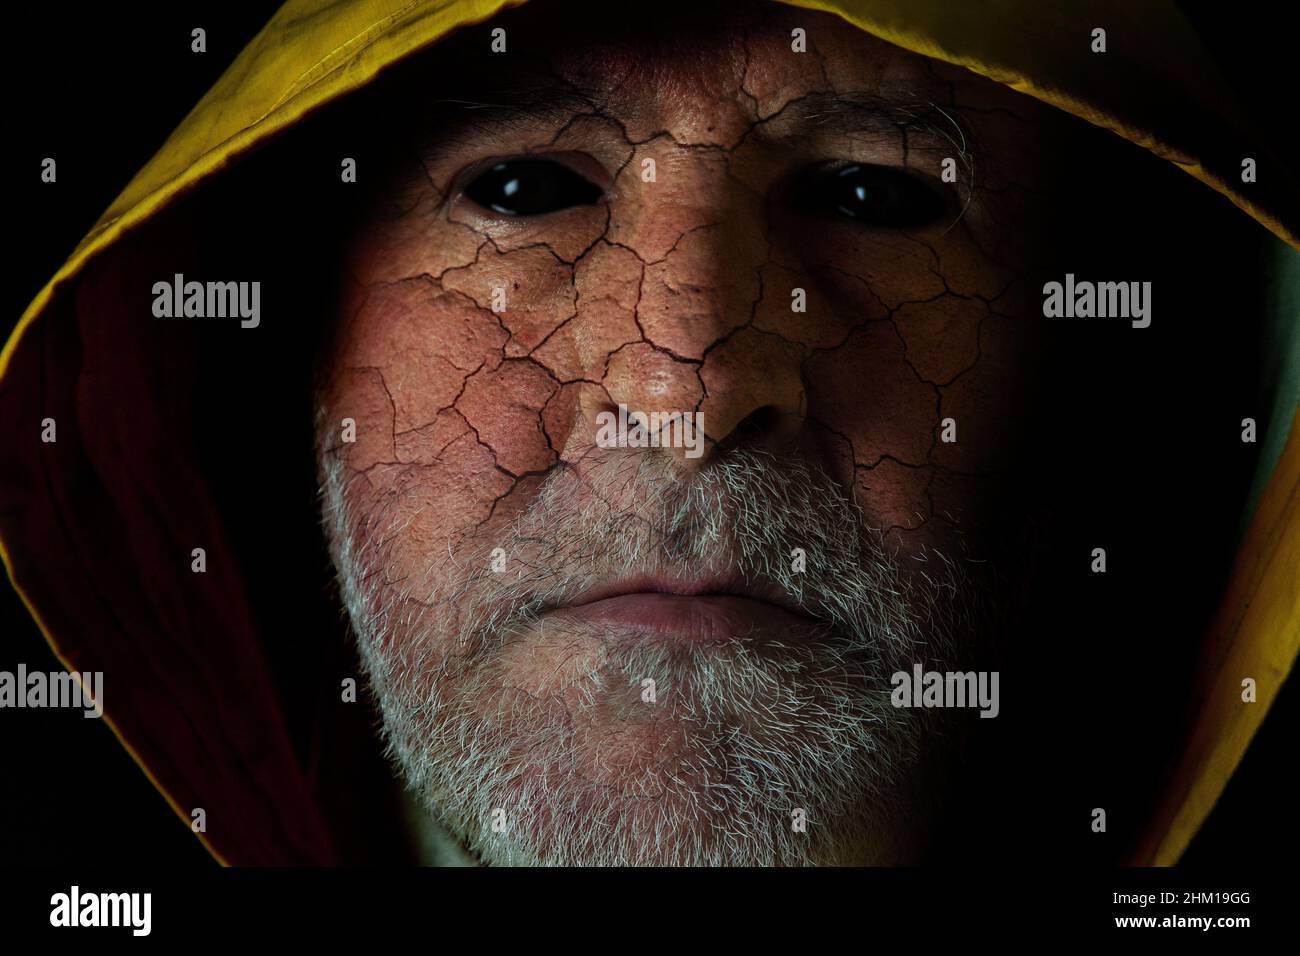 Demons among us. A man's face into which a creature has entered. Stock Photo